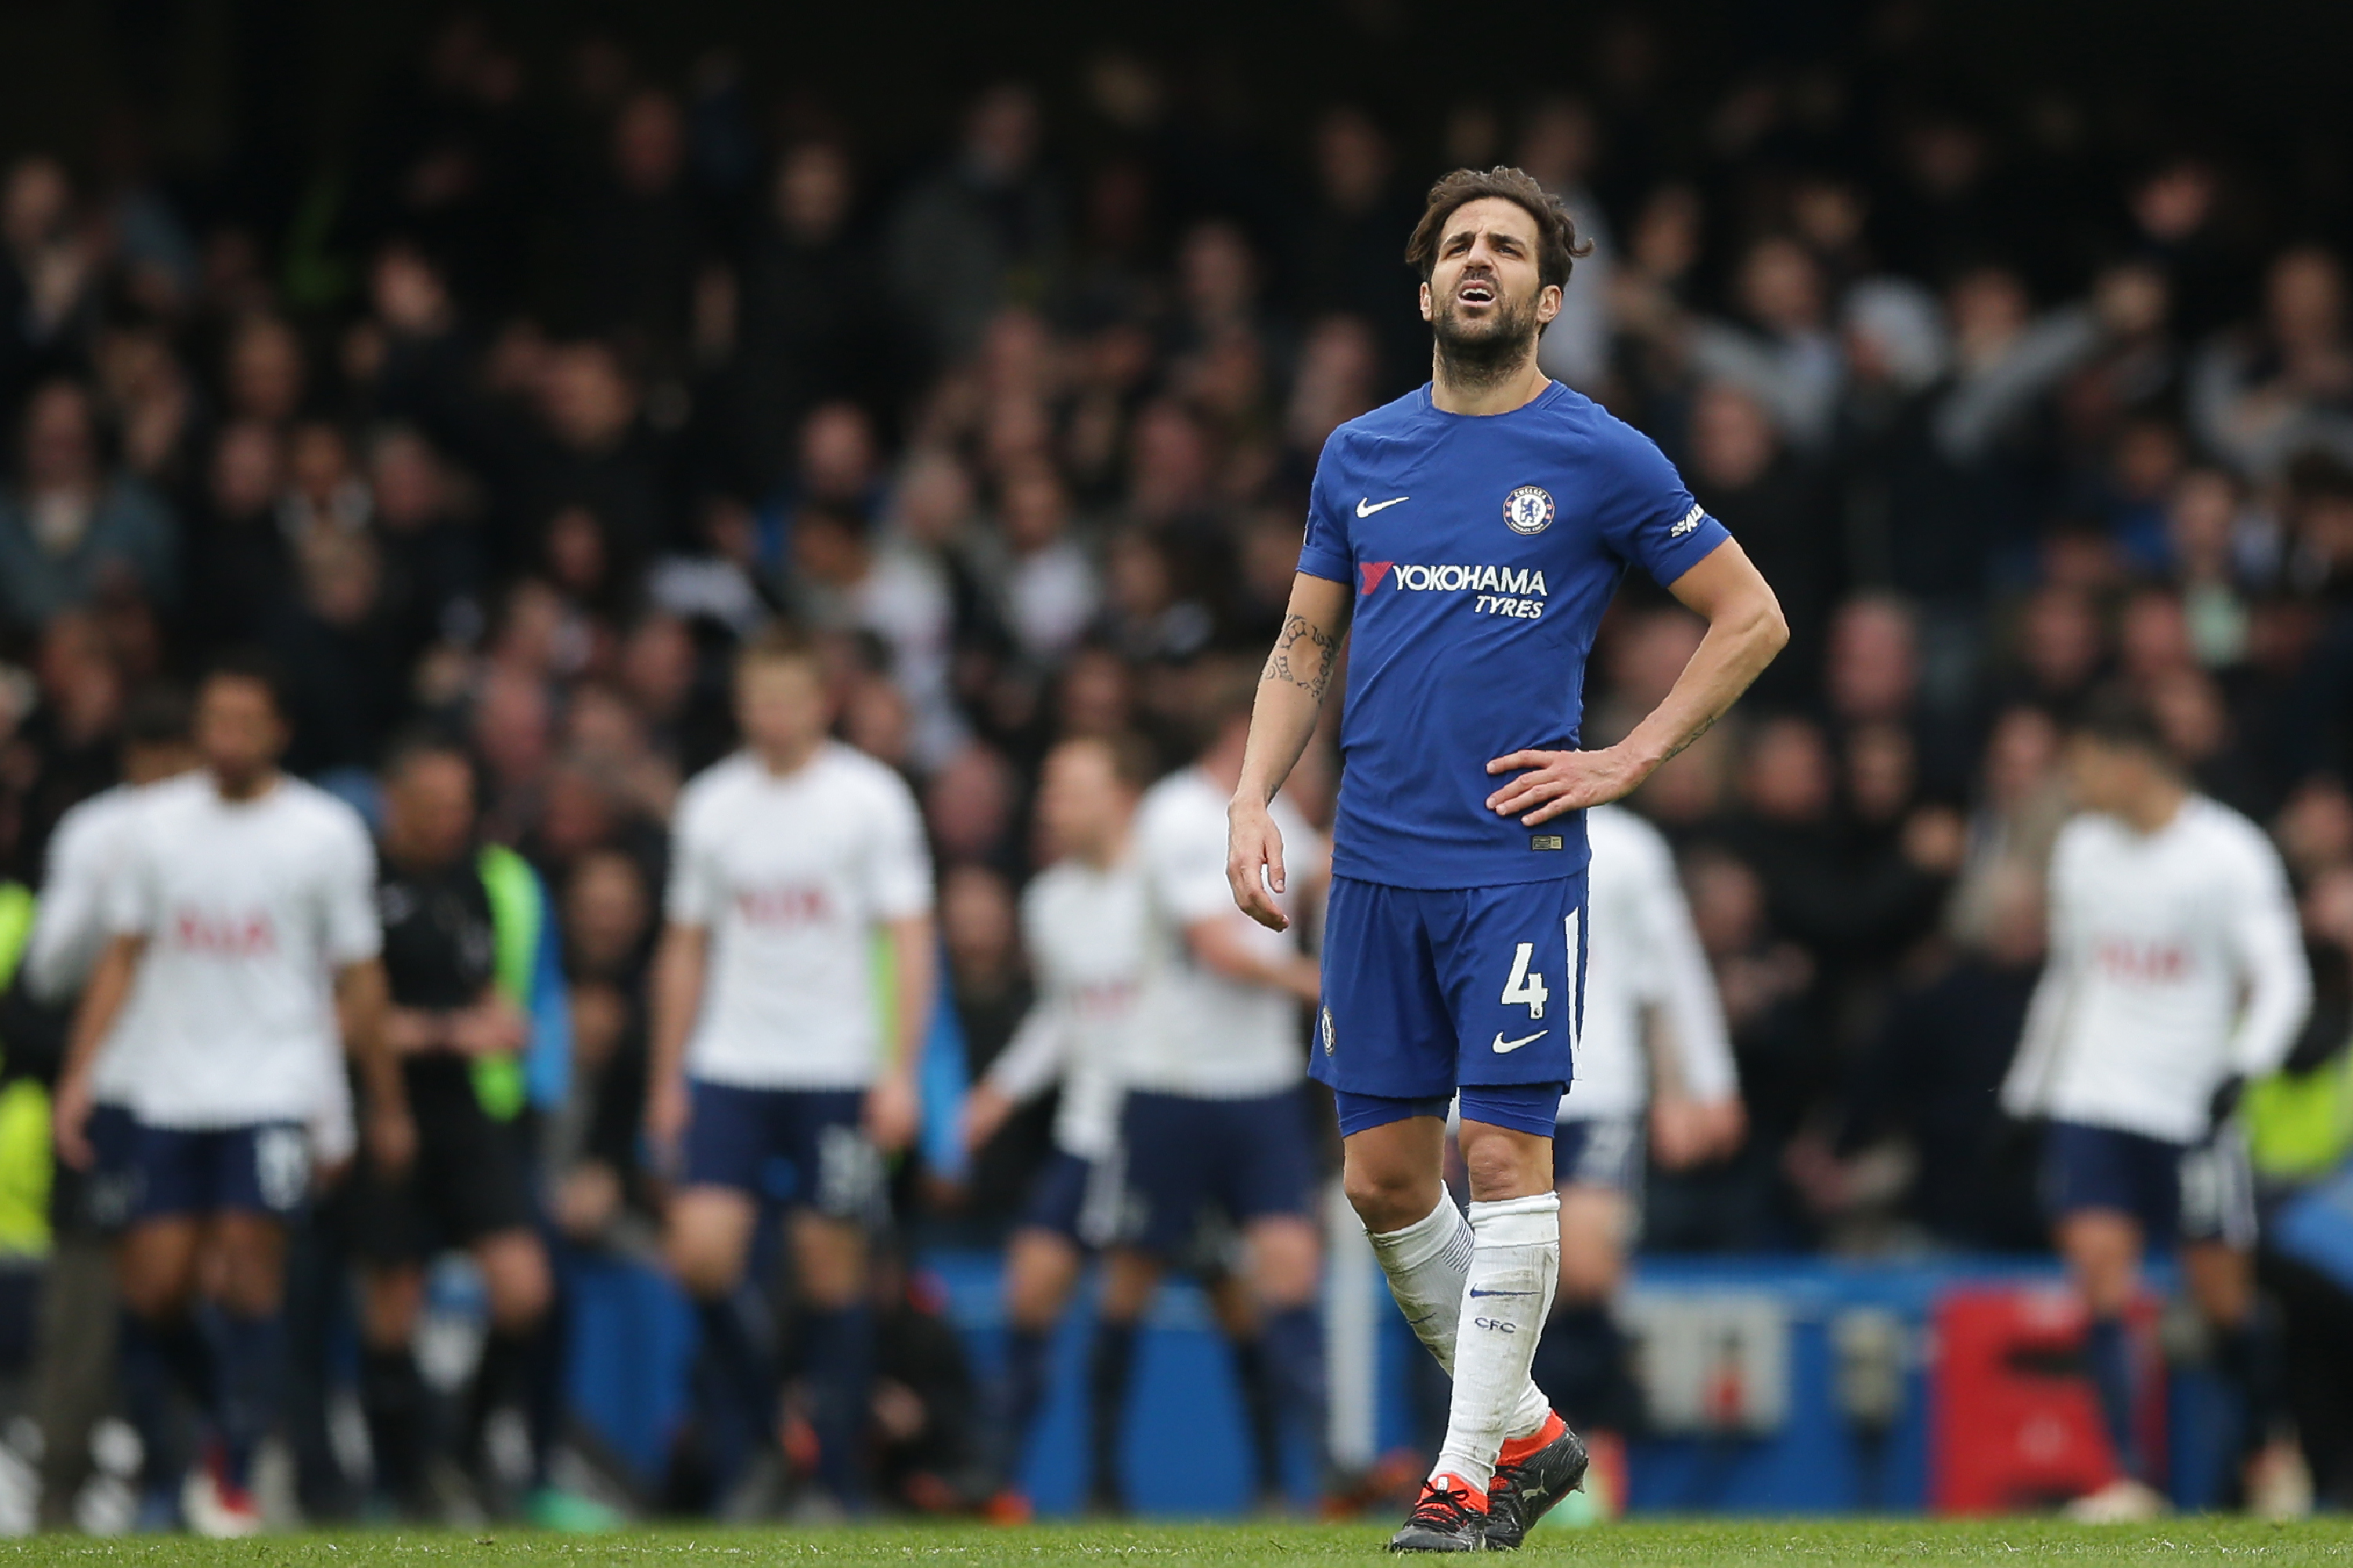 Chelsea's Spanish midfielder Cesc Fabregas reacts as Tottenham players celebrate after scoring their third goal during the English Premier League football match between Chelsea and Tottenham Hotspur at Stamford Bridge in London on April 1, 2018. / AFP PHOTO / Daniel LEAL-OLIVAS / RESTRICTED TO EDITORIAL USE. No use with unauthorized audio, video, data, fixture lists, club/league logos or 'live' services. Online in-match use limited to 75 images, no video emulation. No use in betting, games or single club/league/player publications.  /         (Photo credit should read DANIEL LEAL-OLIVAS/AFP/Getty Images)